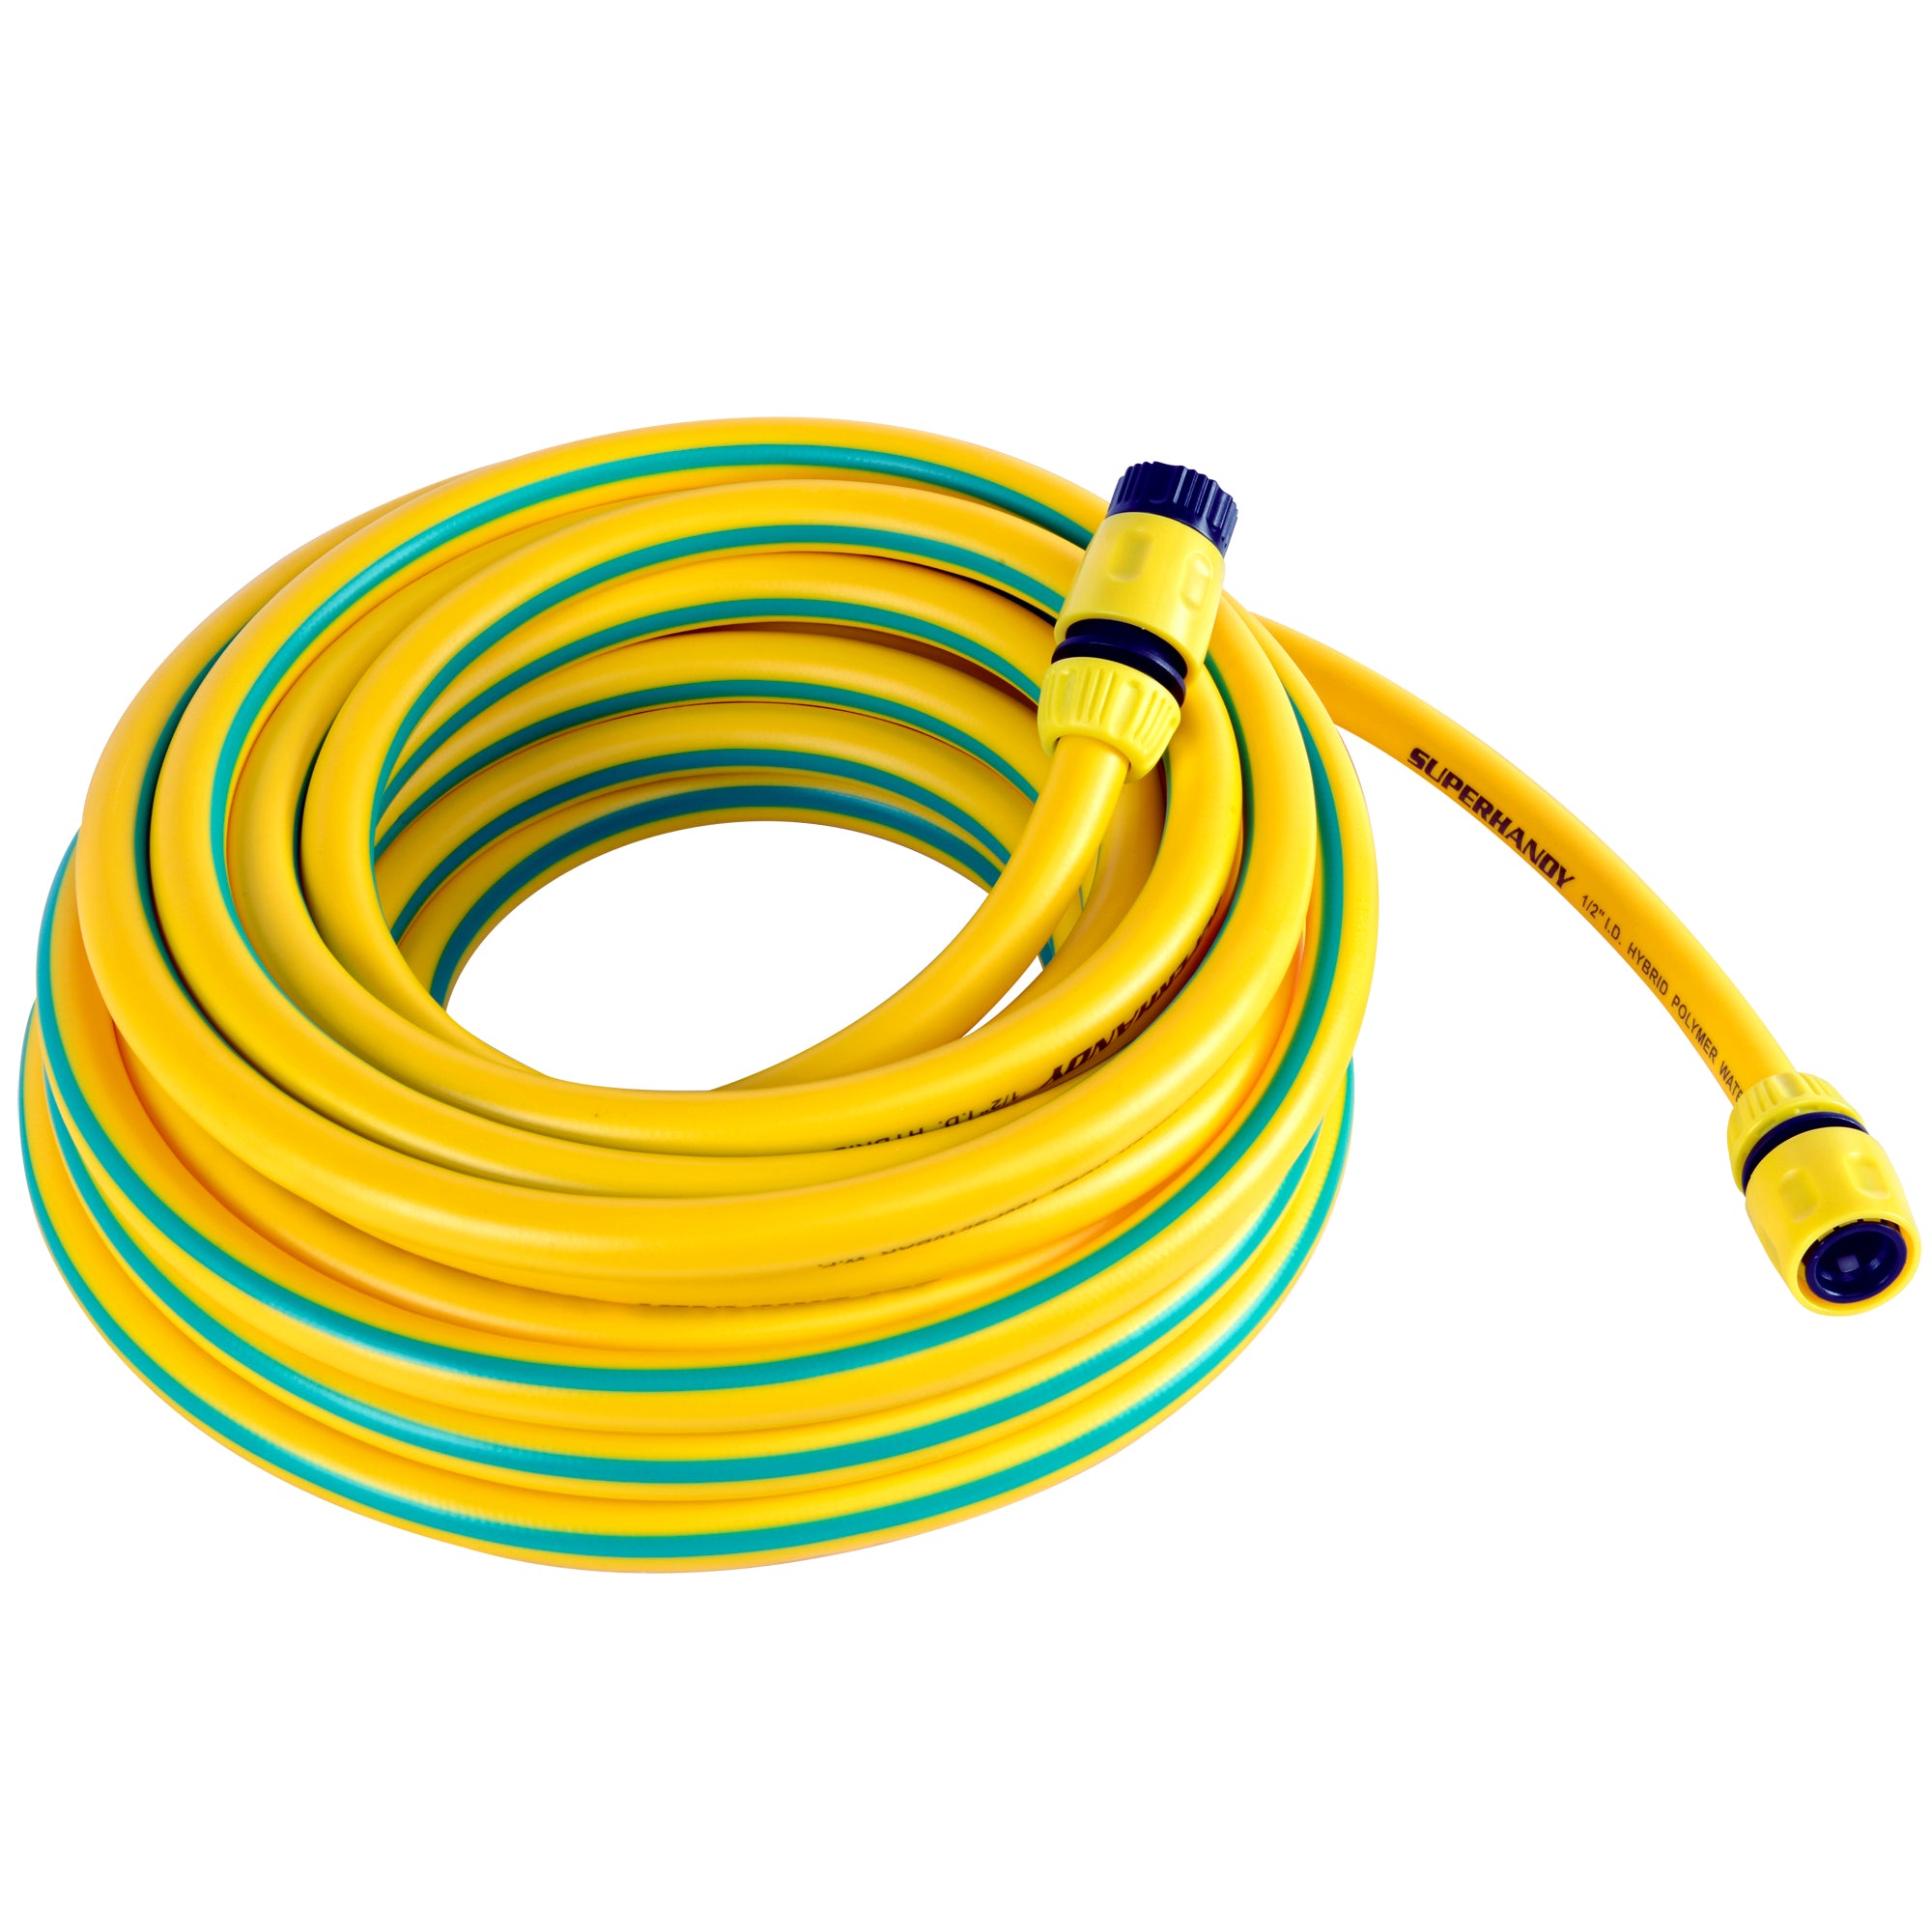 SuperHandy Garden Water Hose 13mm x 15m Heavy Duty Commercial Grade Ultra Flex Hybrid Polymer Hose, Max Pressure 150 PSI/10 BAR with 3/4" Plastic Connector